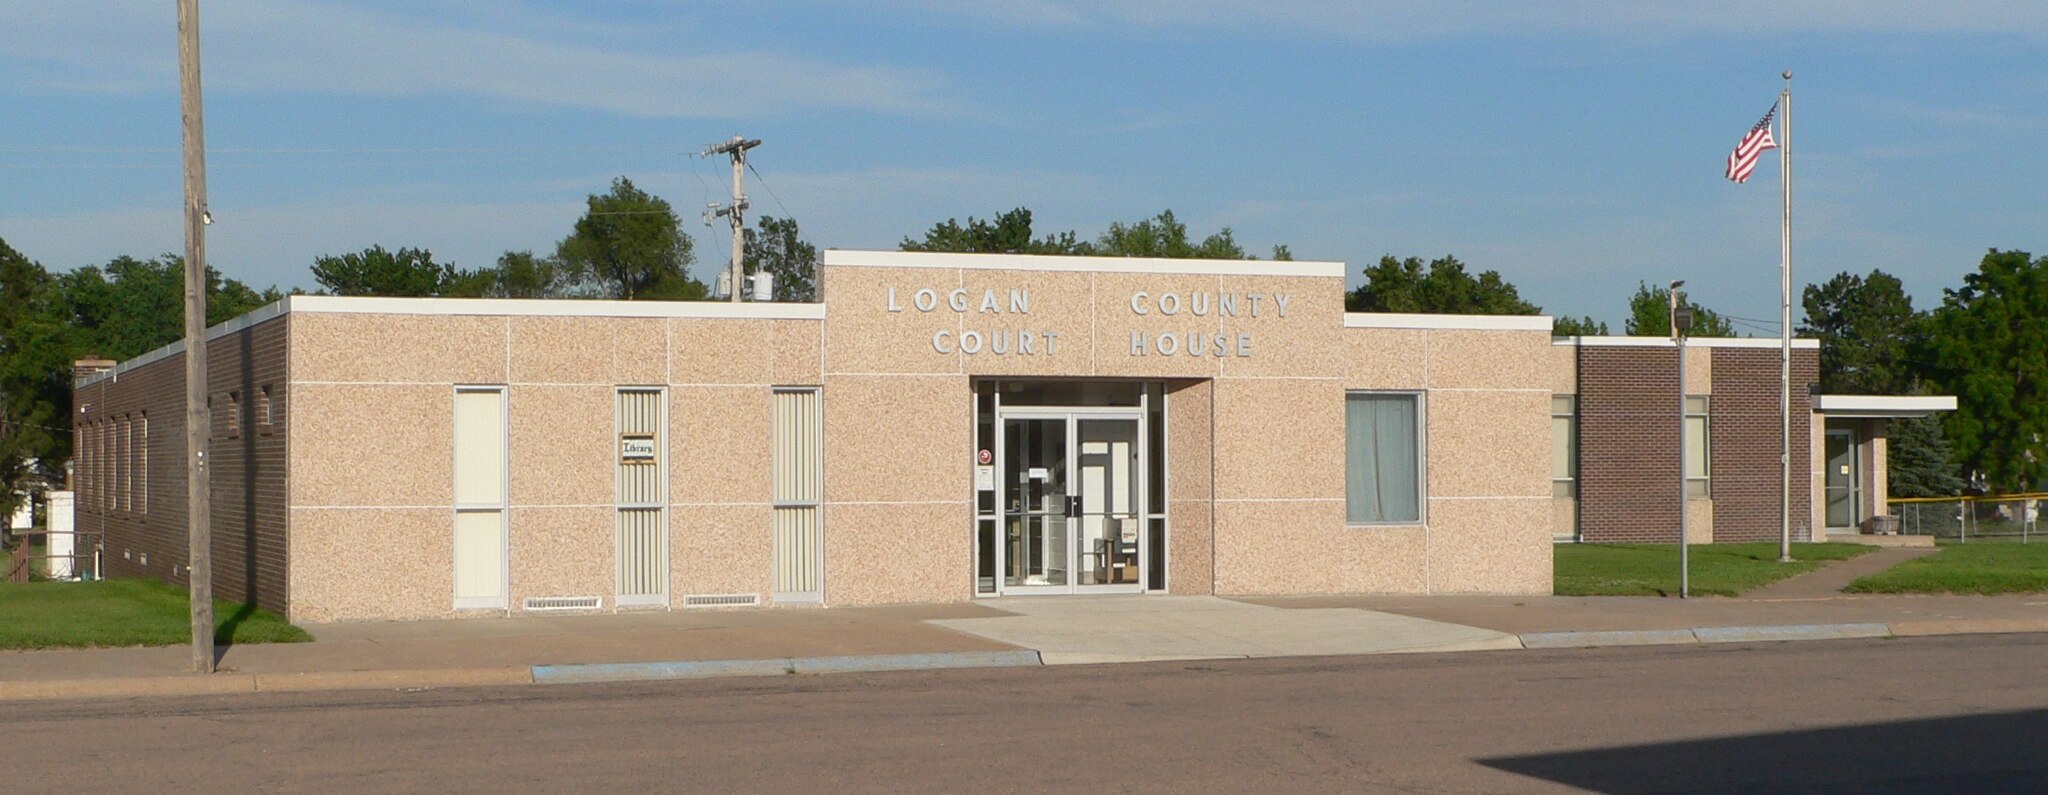 Logan County, Nebraska courthouse from NW 2